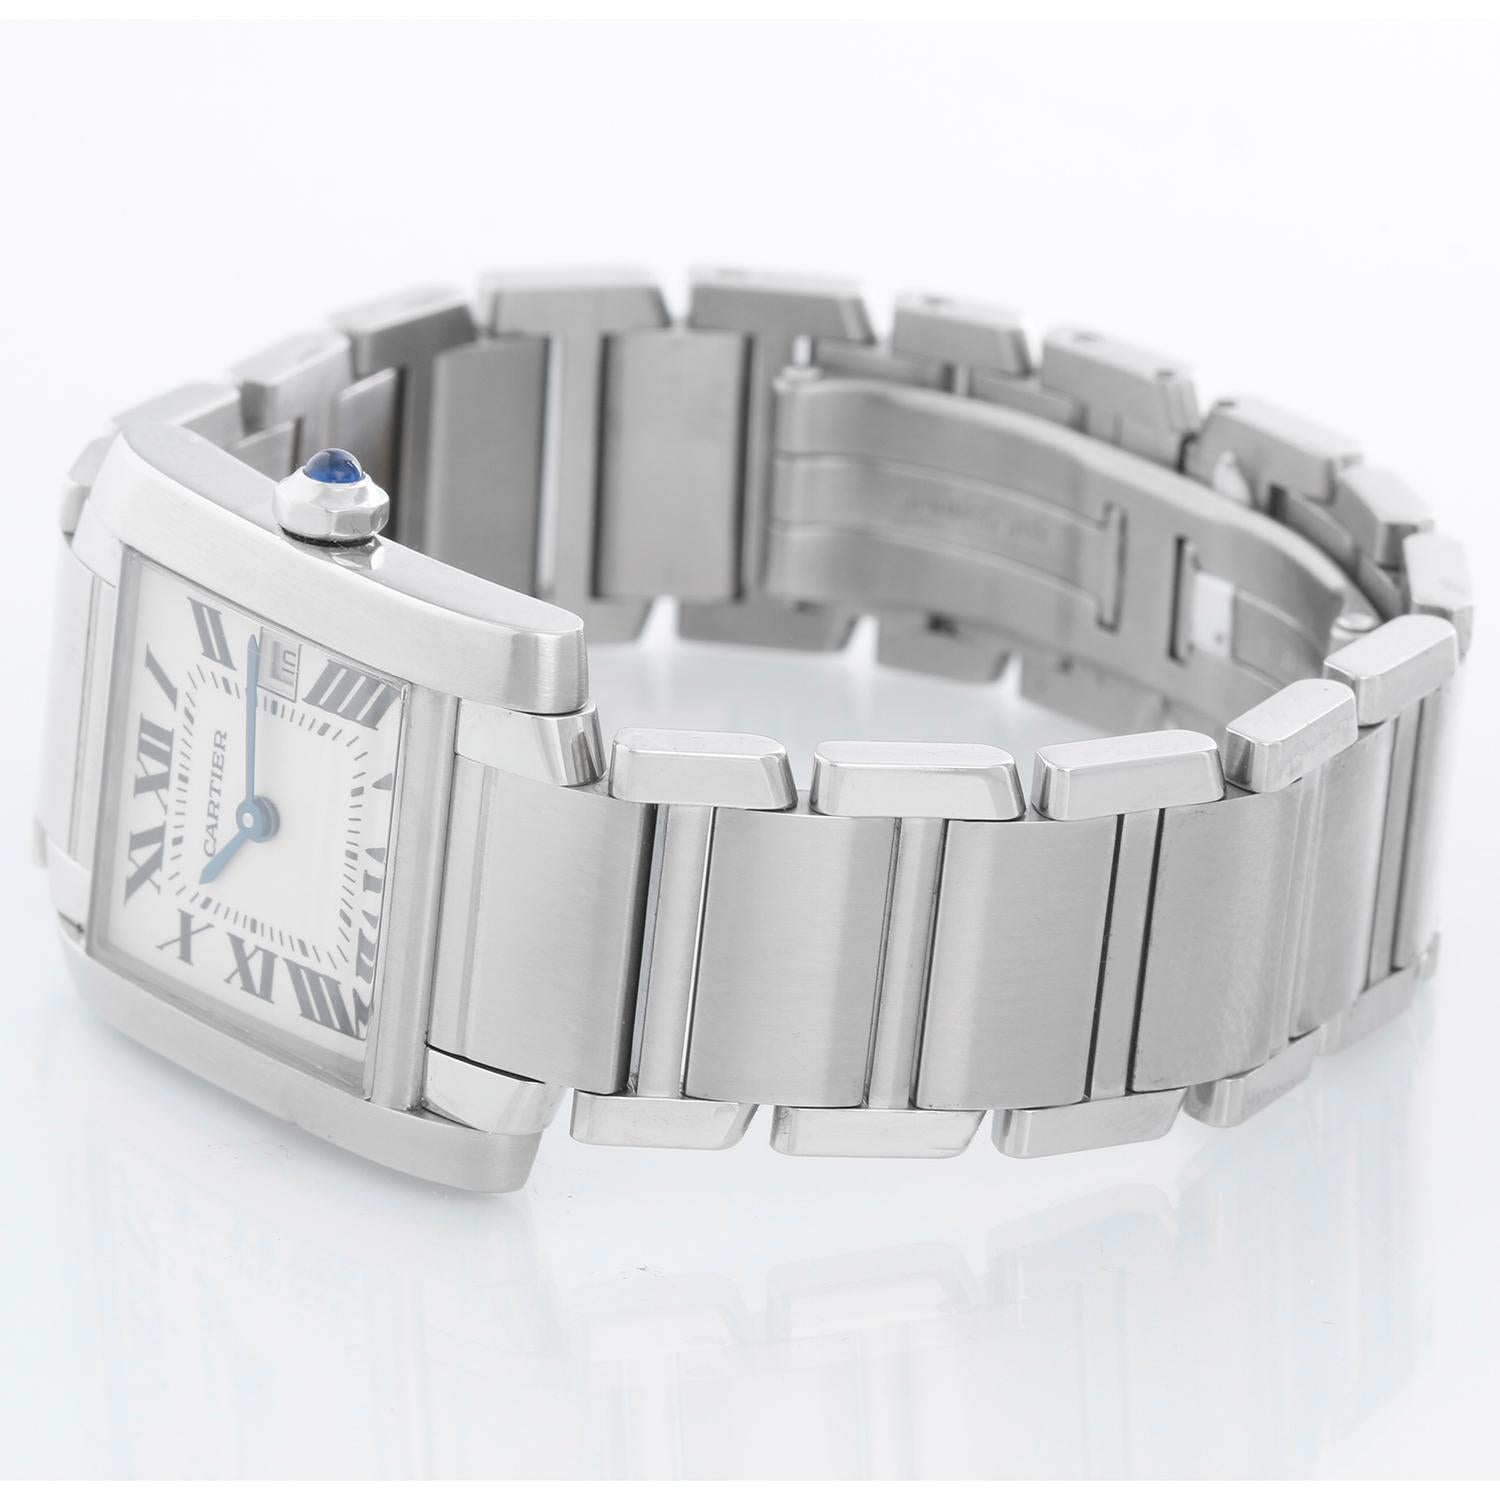 Cartier Tank Francaise Midsize Stainless Steel Watch 2465 - Quartz. Stainless steel case (25mm x 30mm). Ivory colored dial with black Roman numerals; date at 3 o'clock. Stainless steel Cartier bracelet with deployant clasp. Pre-owned with custom box